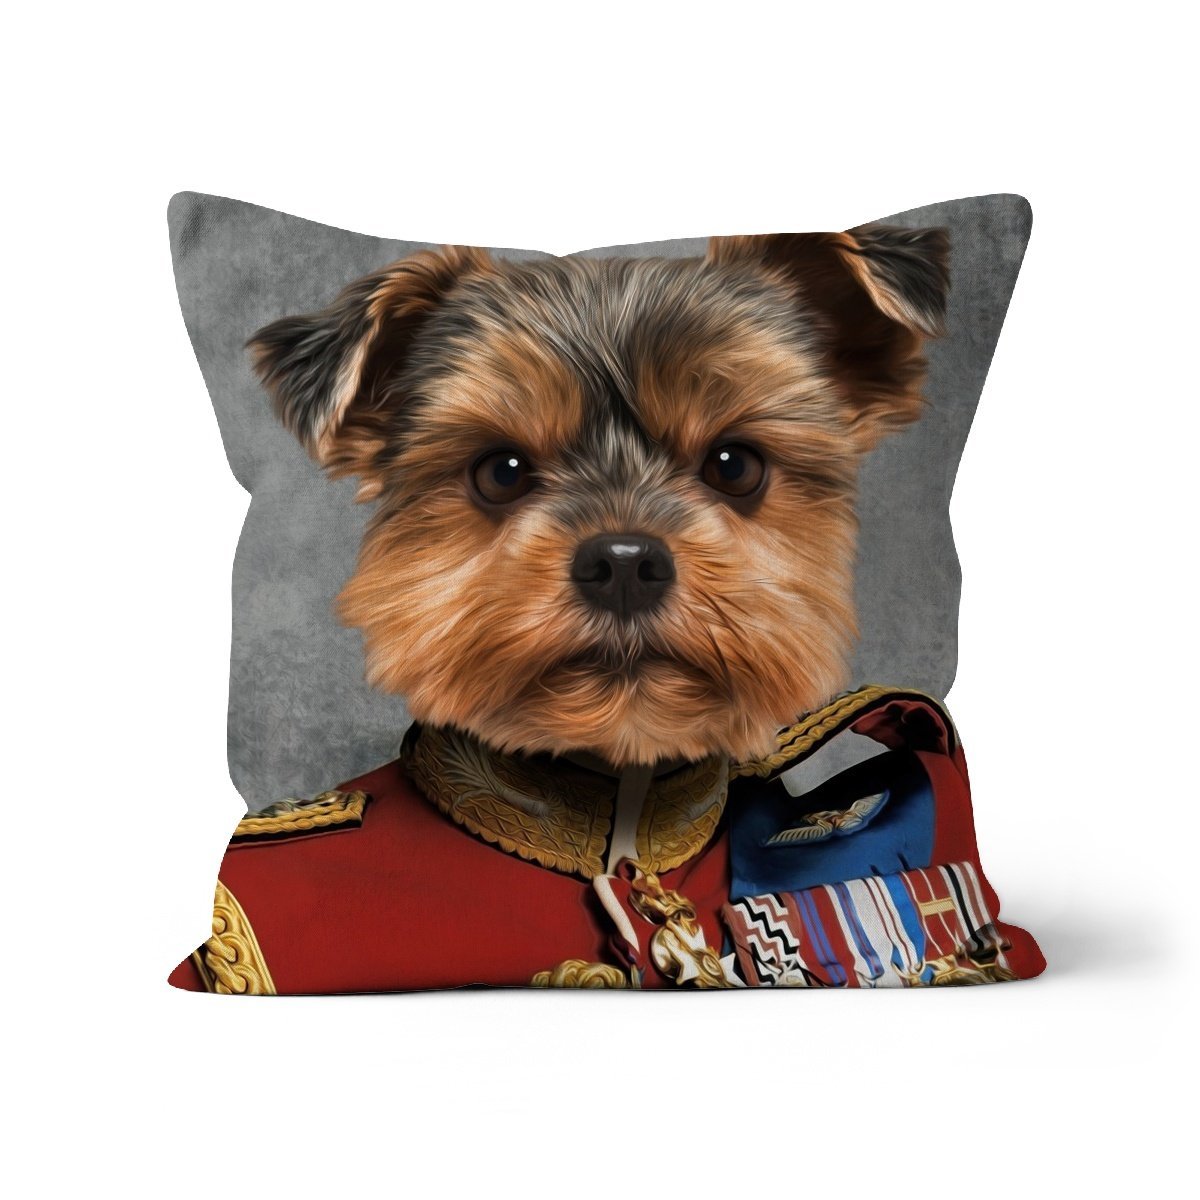 The Governor: Custom Pet Throw Pillow  - Paw & Glory - #pet portraits# - #dog portraits# - #pet portraits uk#paw and glory, pet portraits cushion,dog pillow custom, custom pet pillows, pup pillows, pillow with dogs face, dog pillow cases